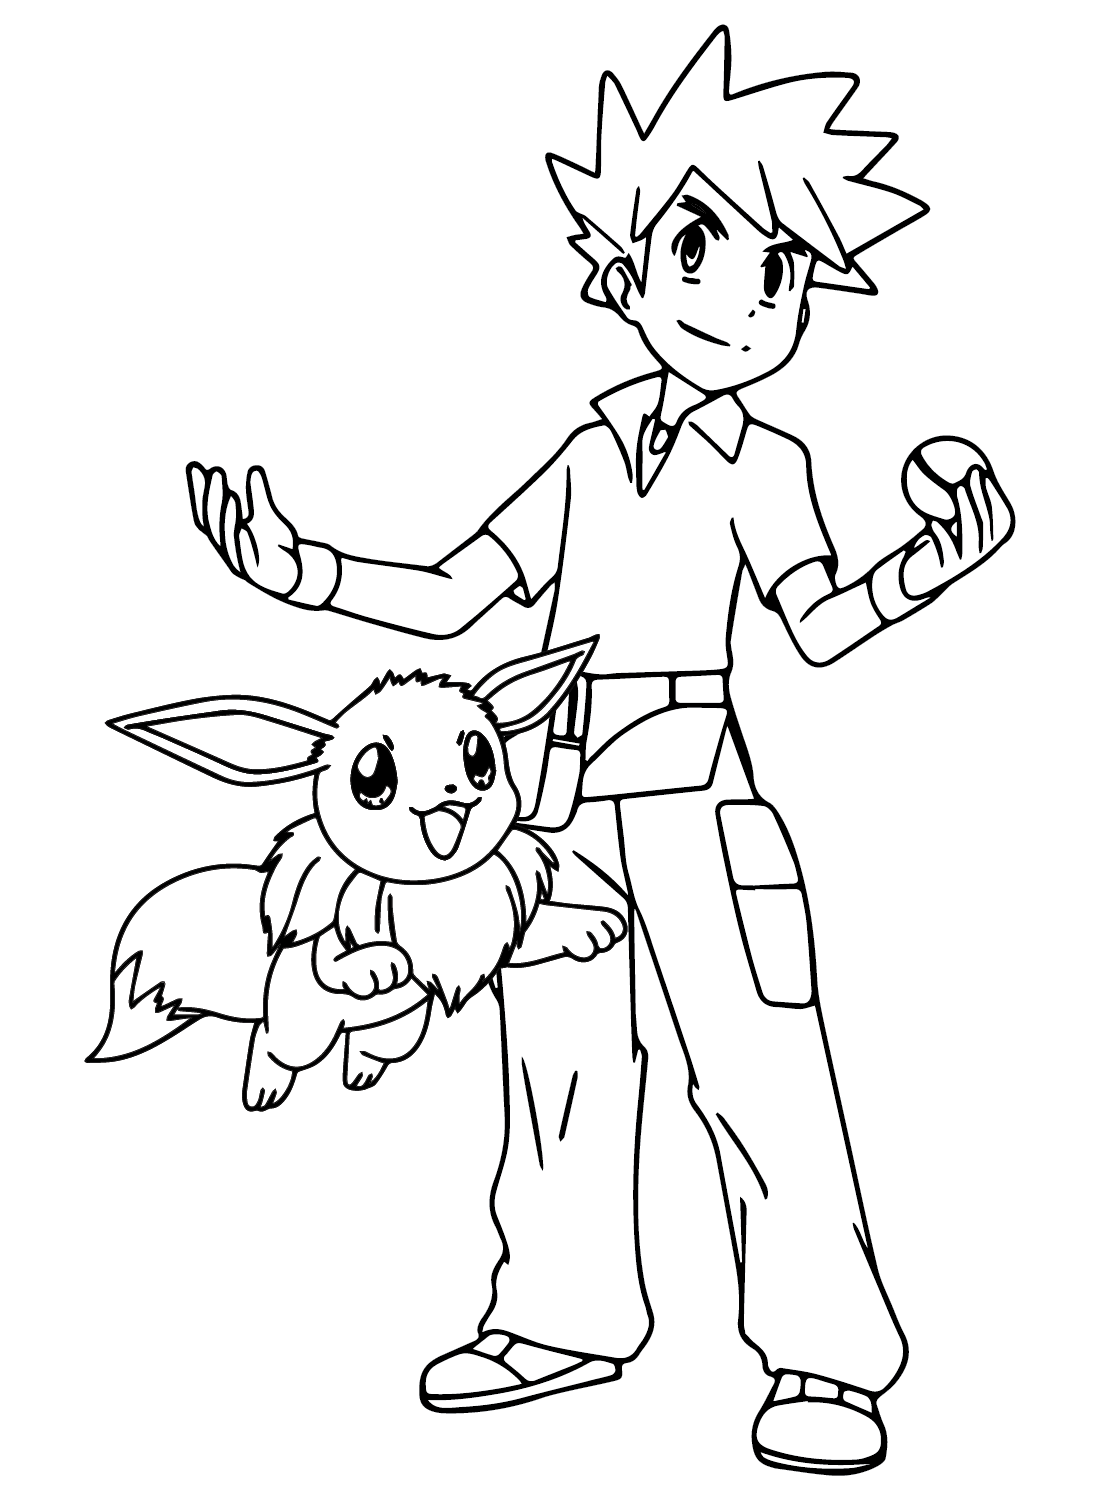 Gary Oak and Eevee Pokemon to Color